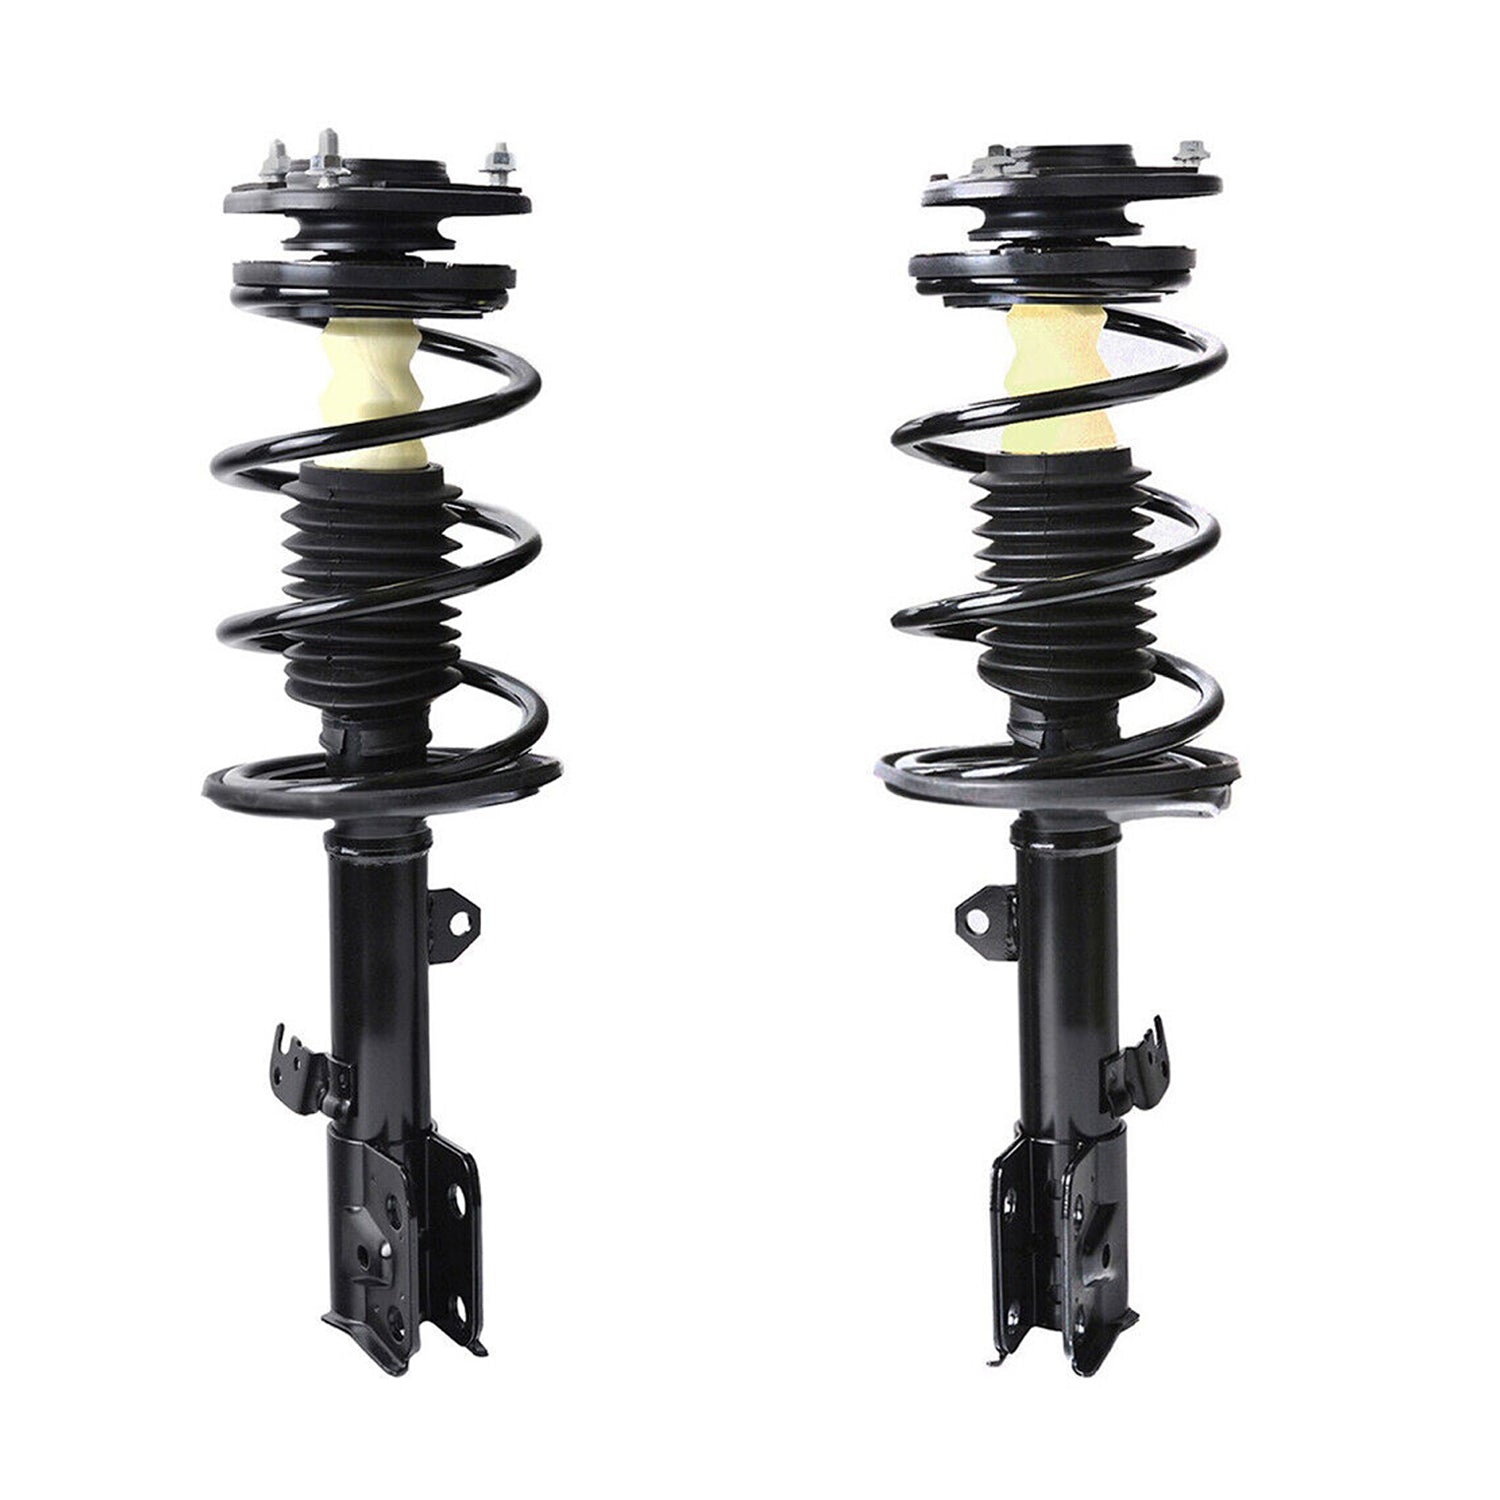 (Out of Stock) Front Pair Complete Strut for Toyota Corolla 2009-2013 & Matrix 2011-2013